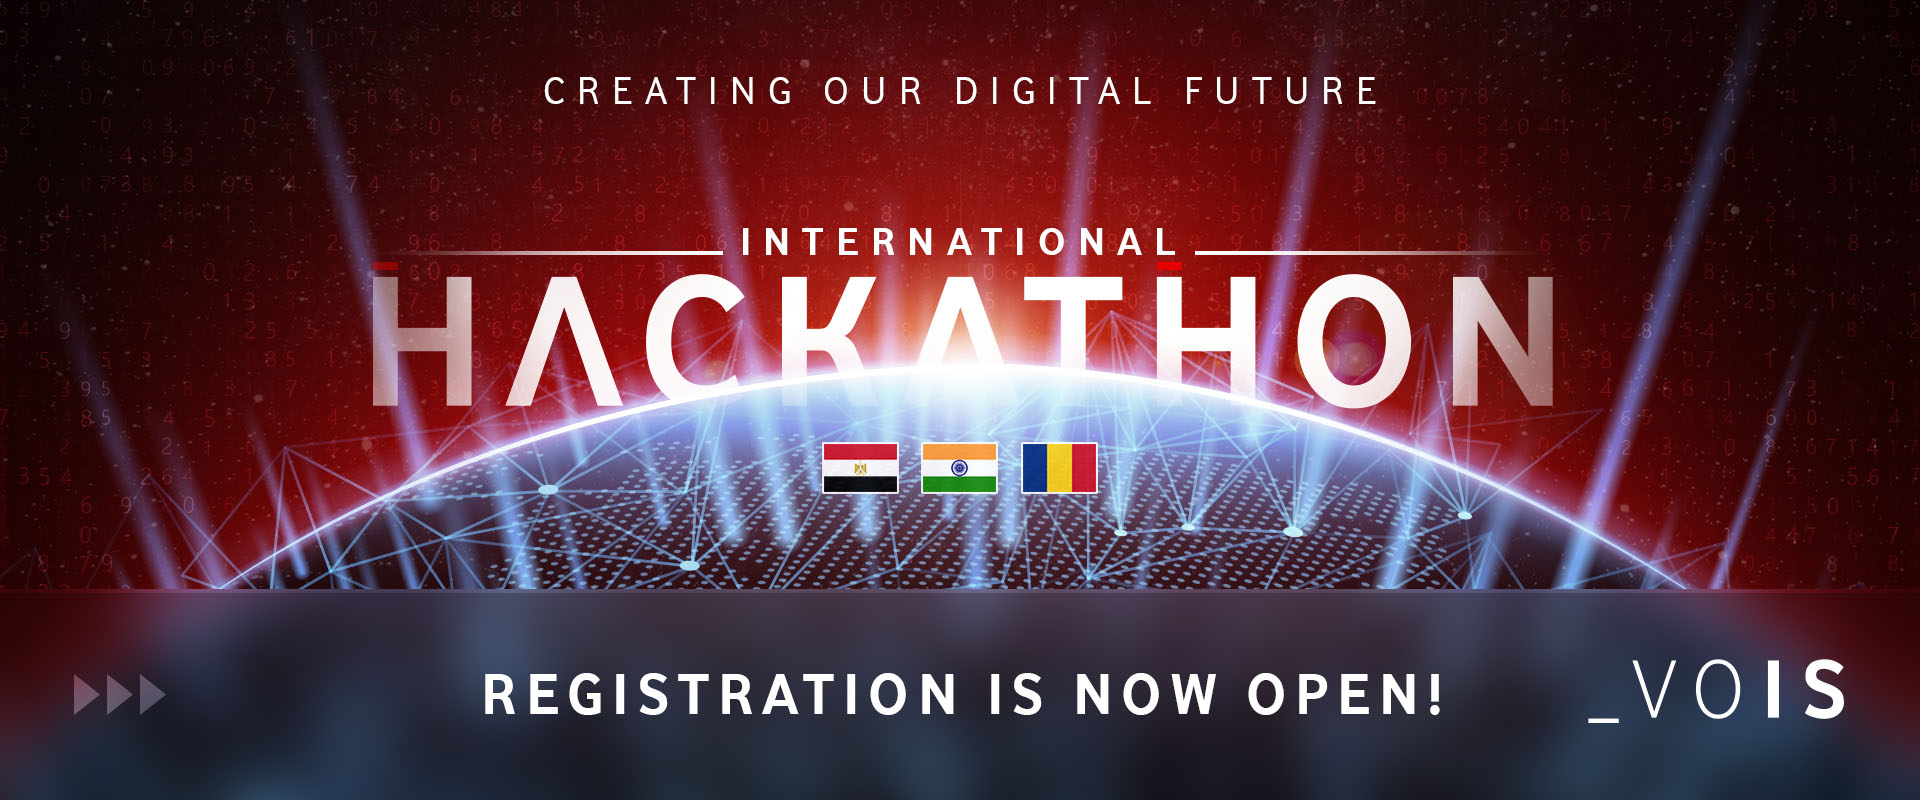 Our flagship International Hackathon is now live!